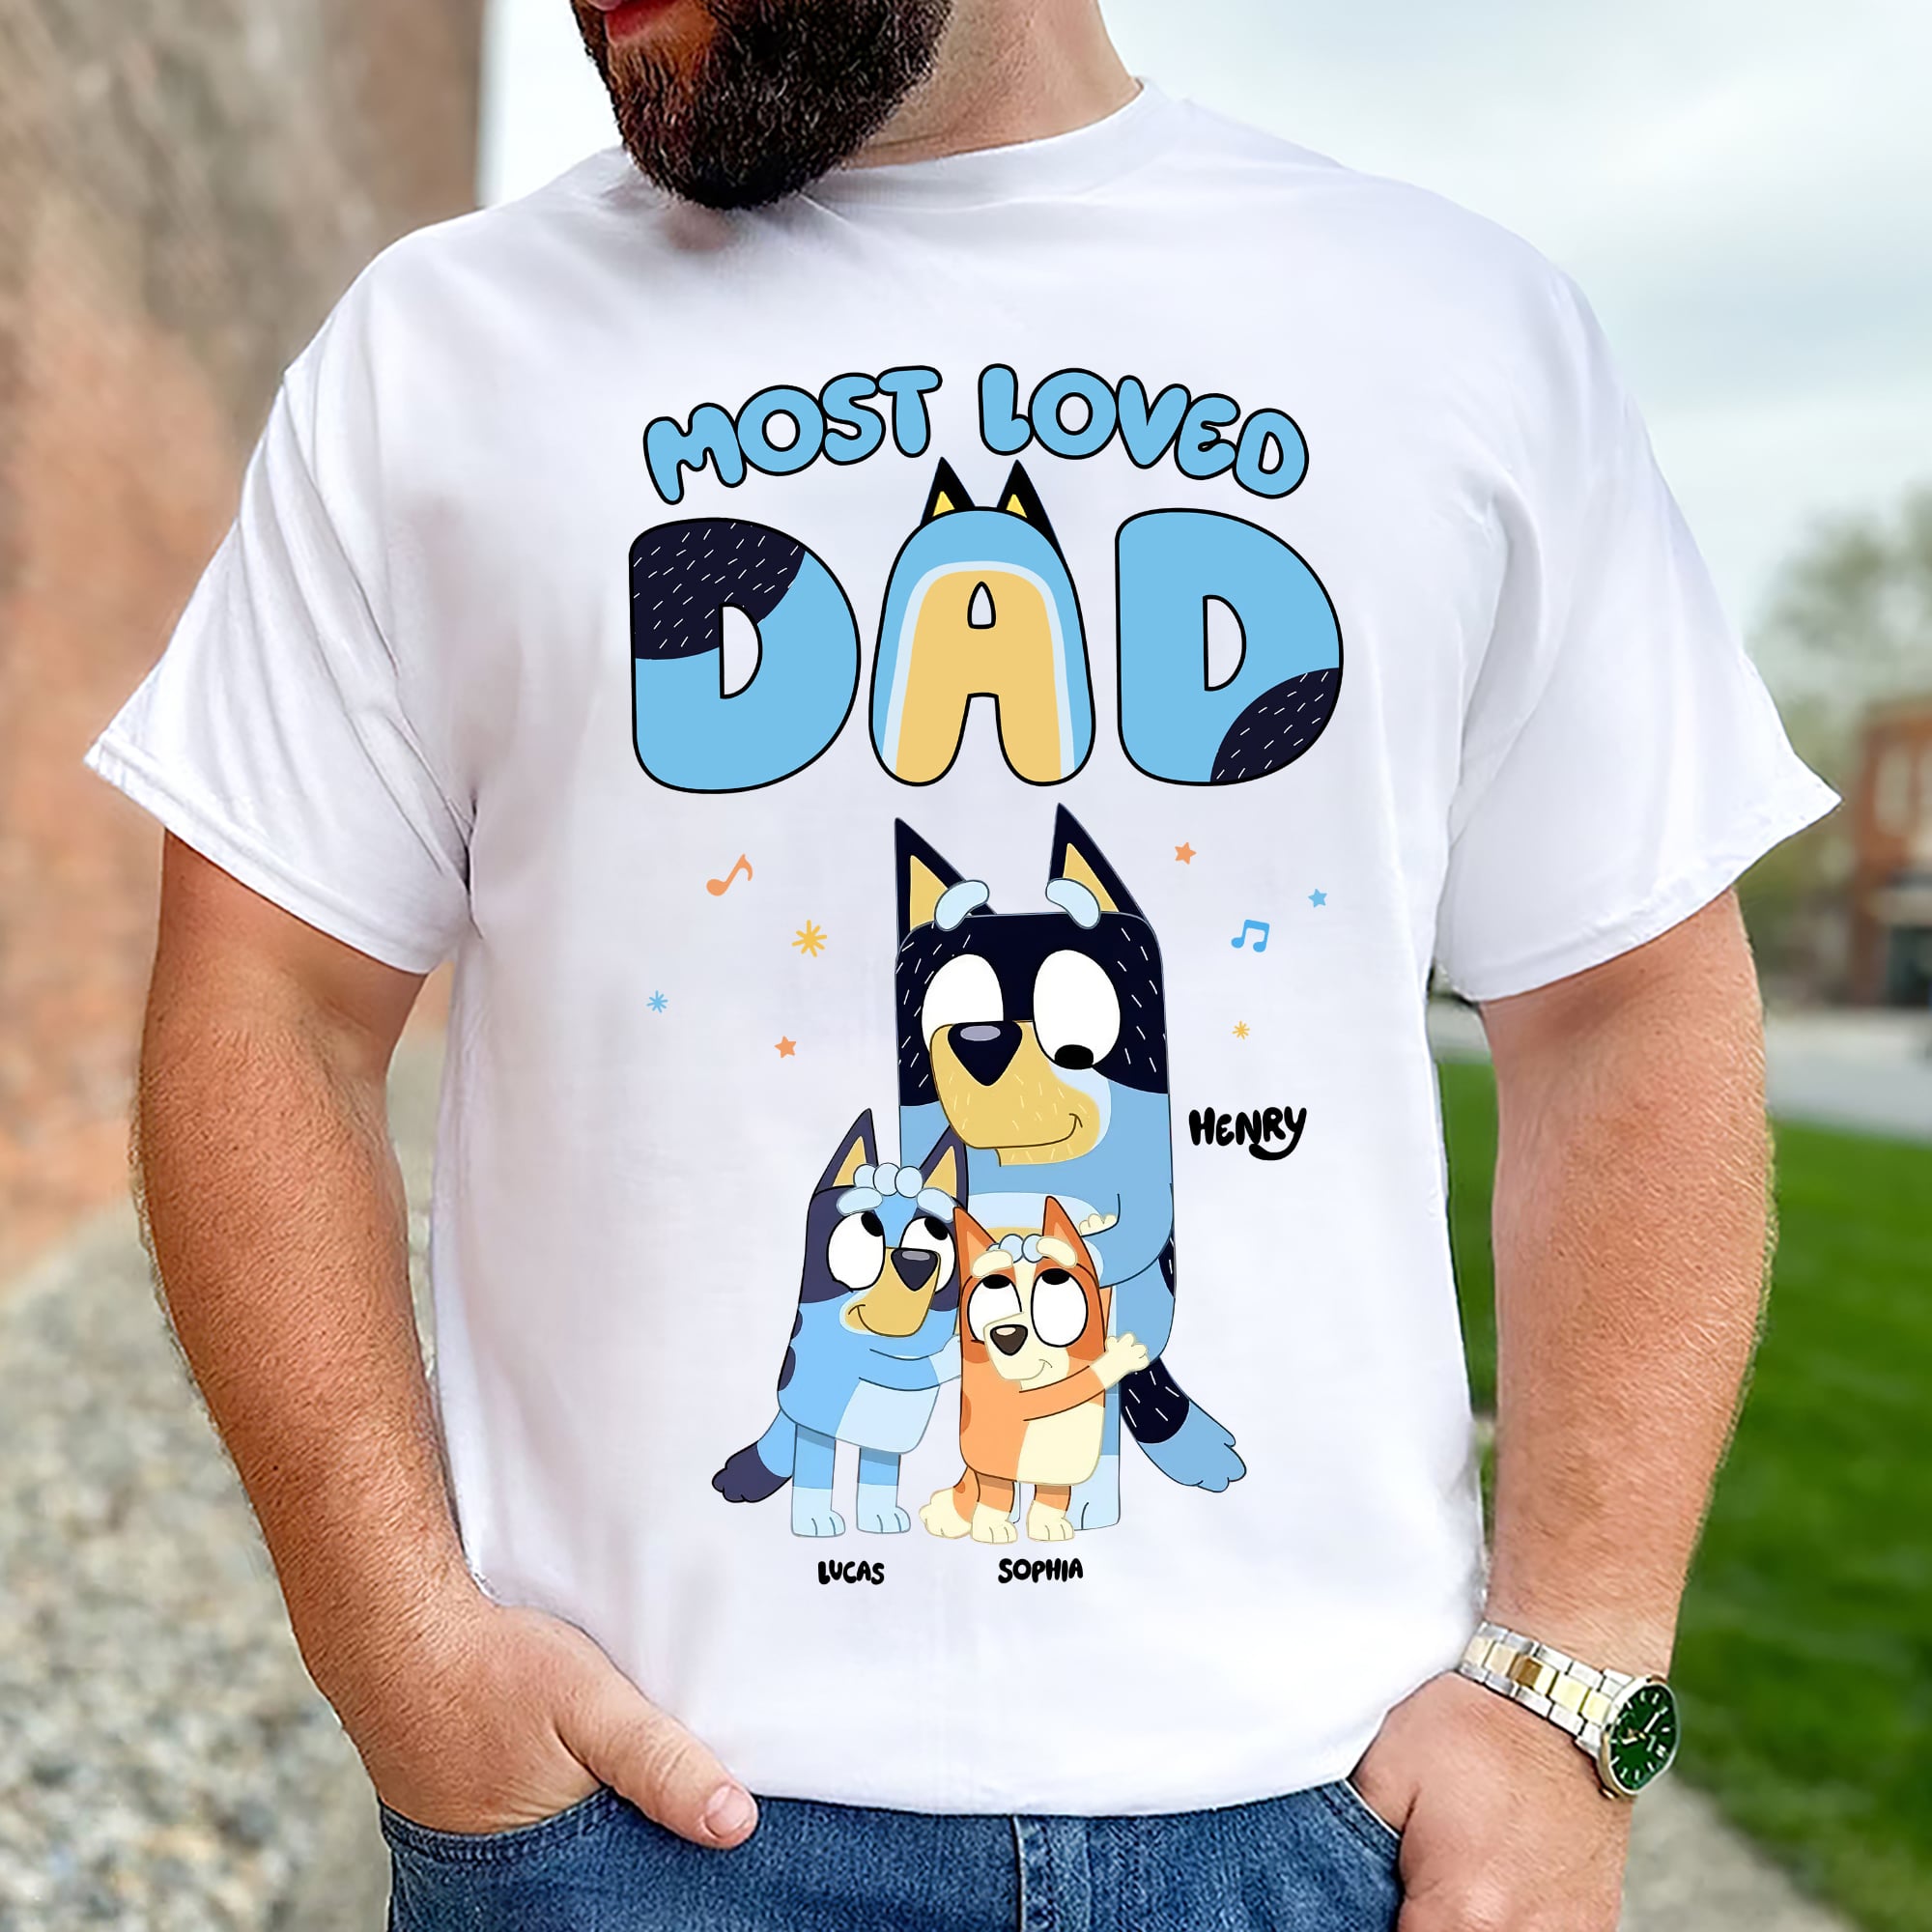 Personalized Gifts For Dad Shirt 05qhti090524 Most Loved Dad-Homacus